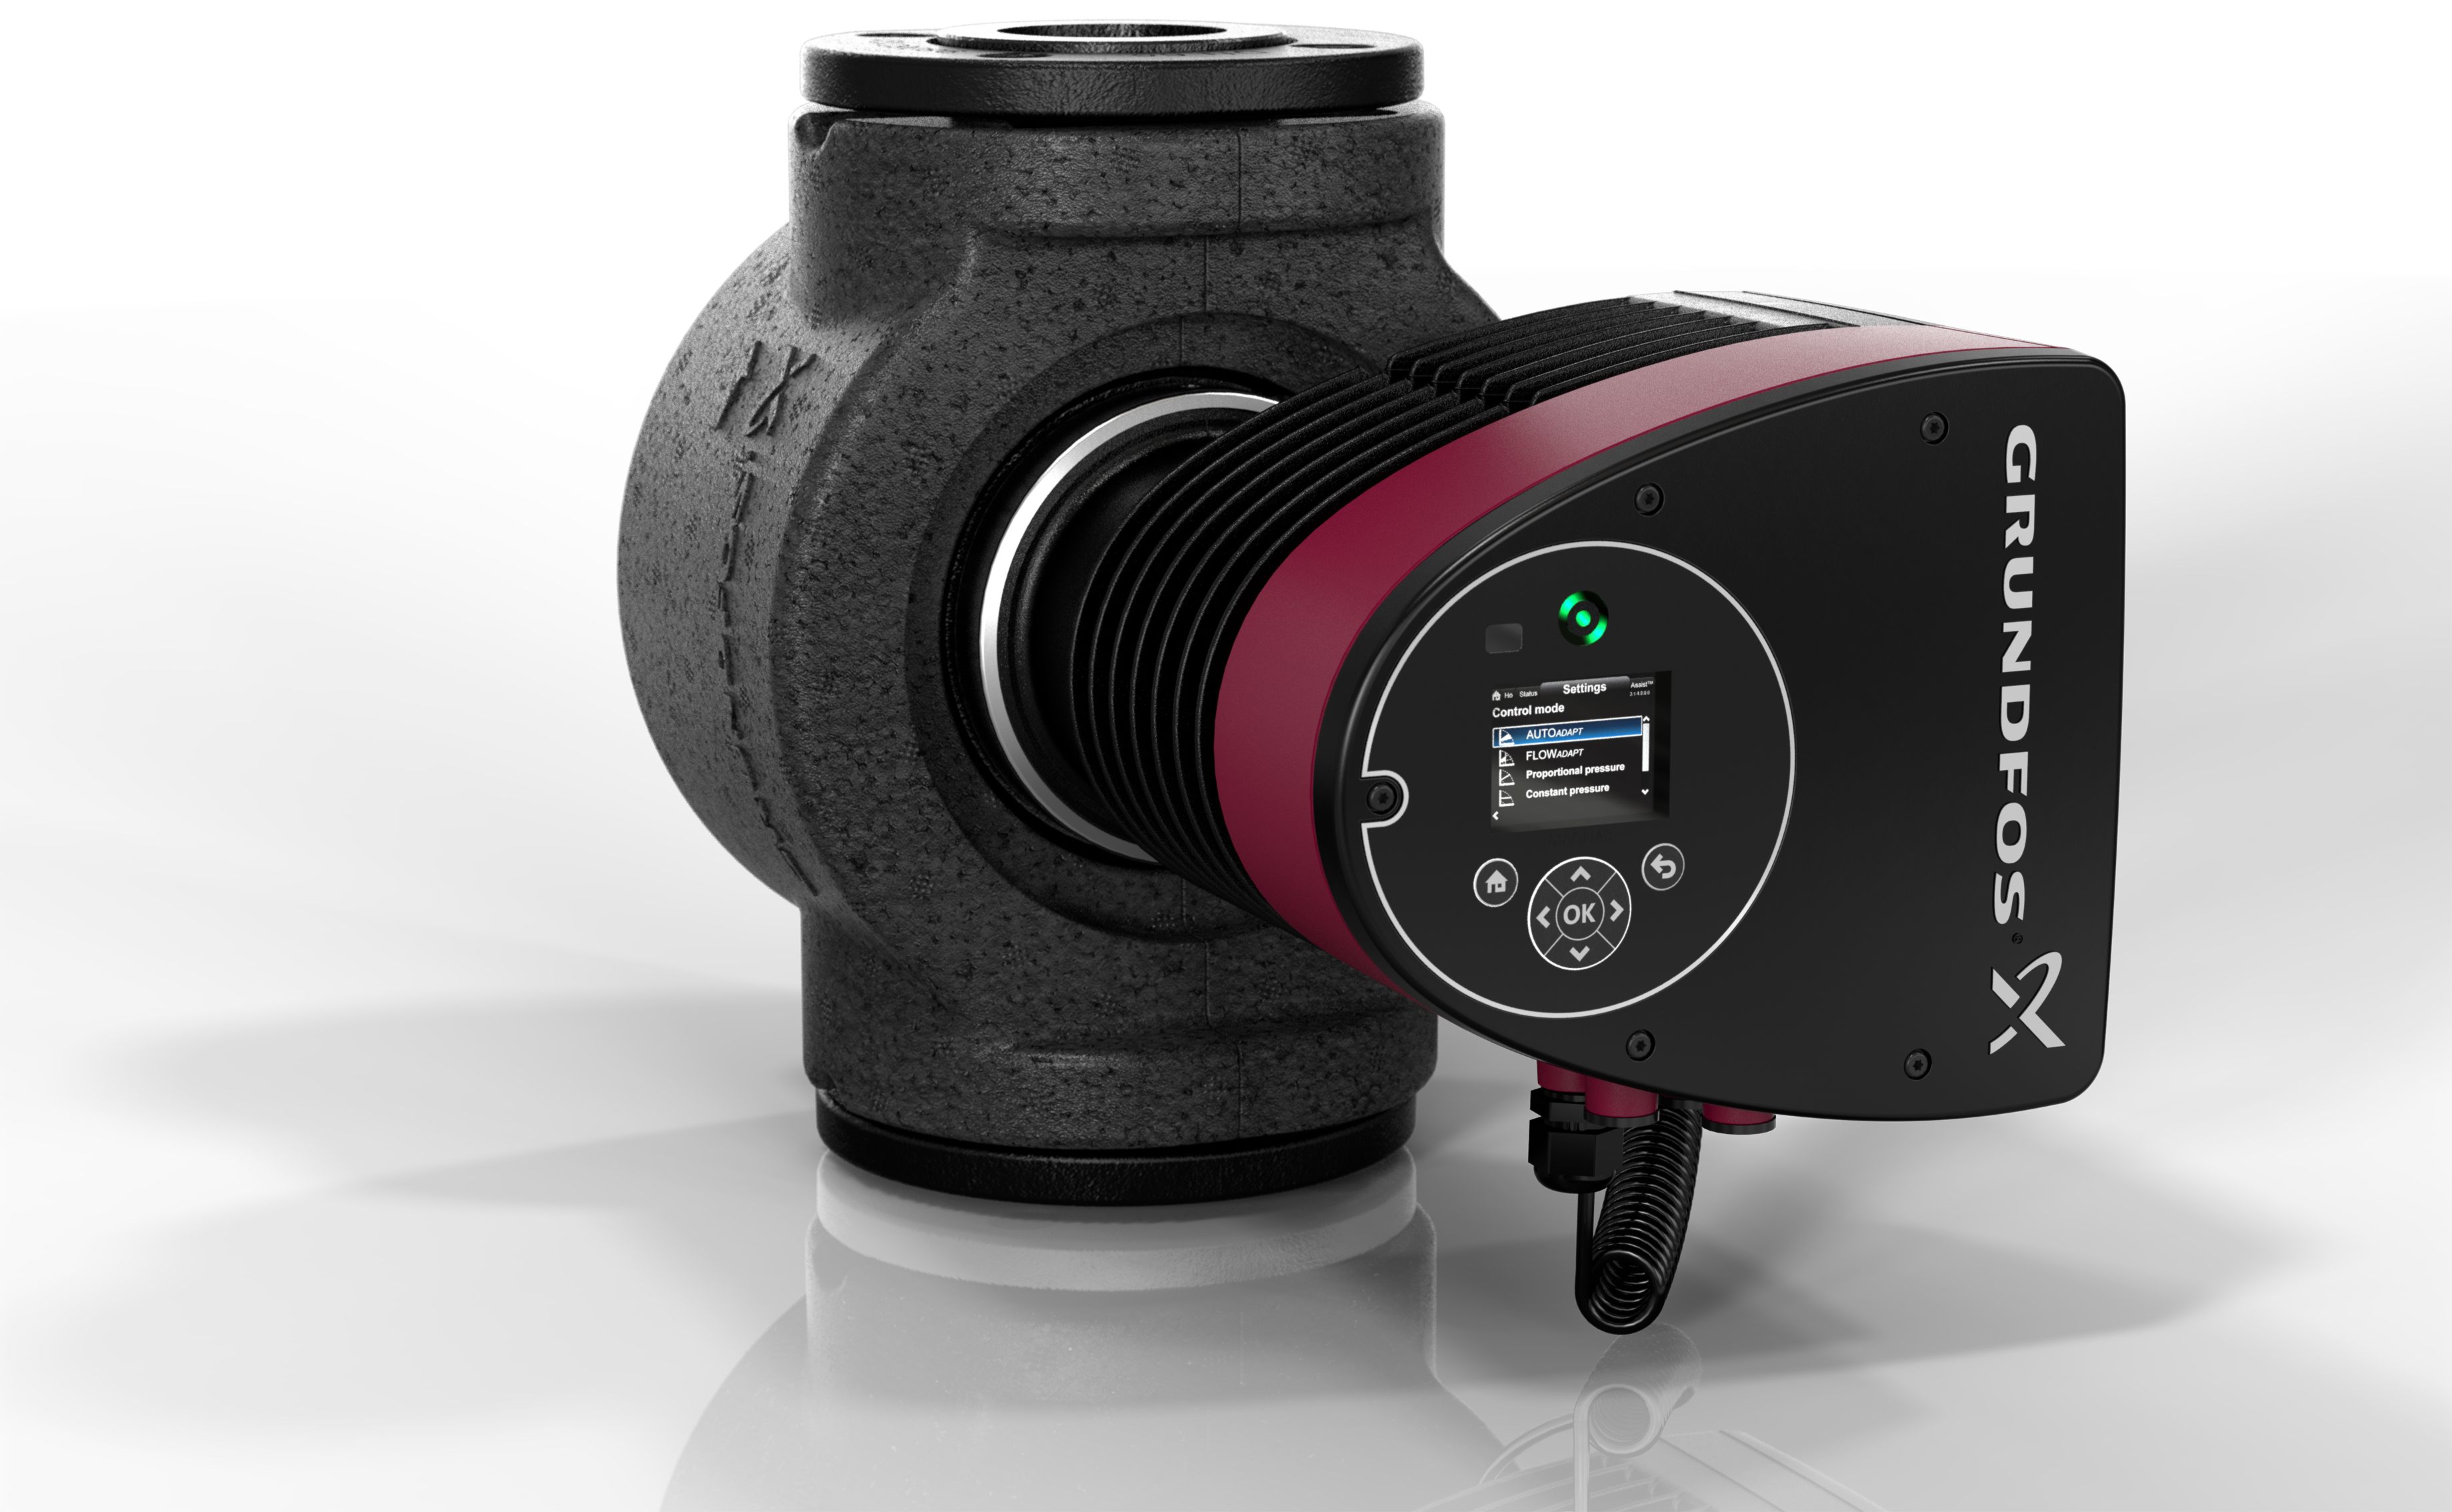 Grundfos’ MAGNA3 pump features compact, intelligent circulator pumps fitted with built-in sensors.